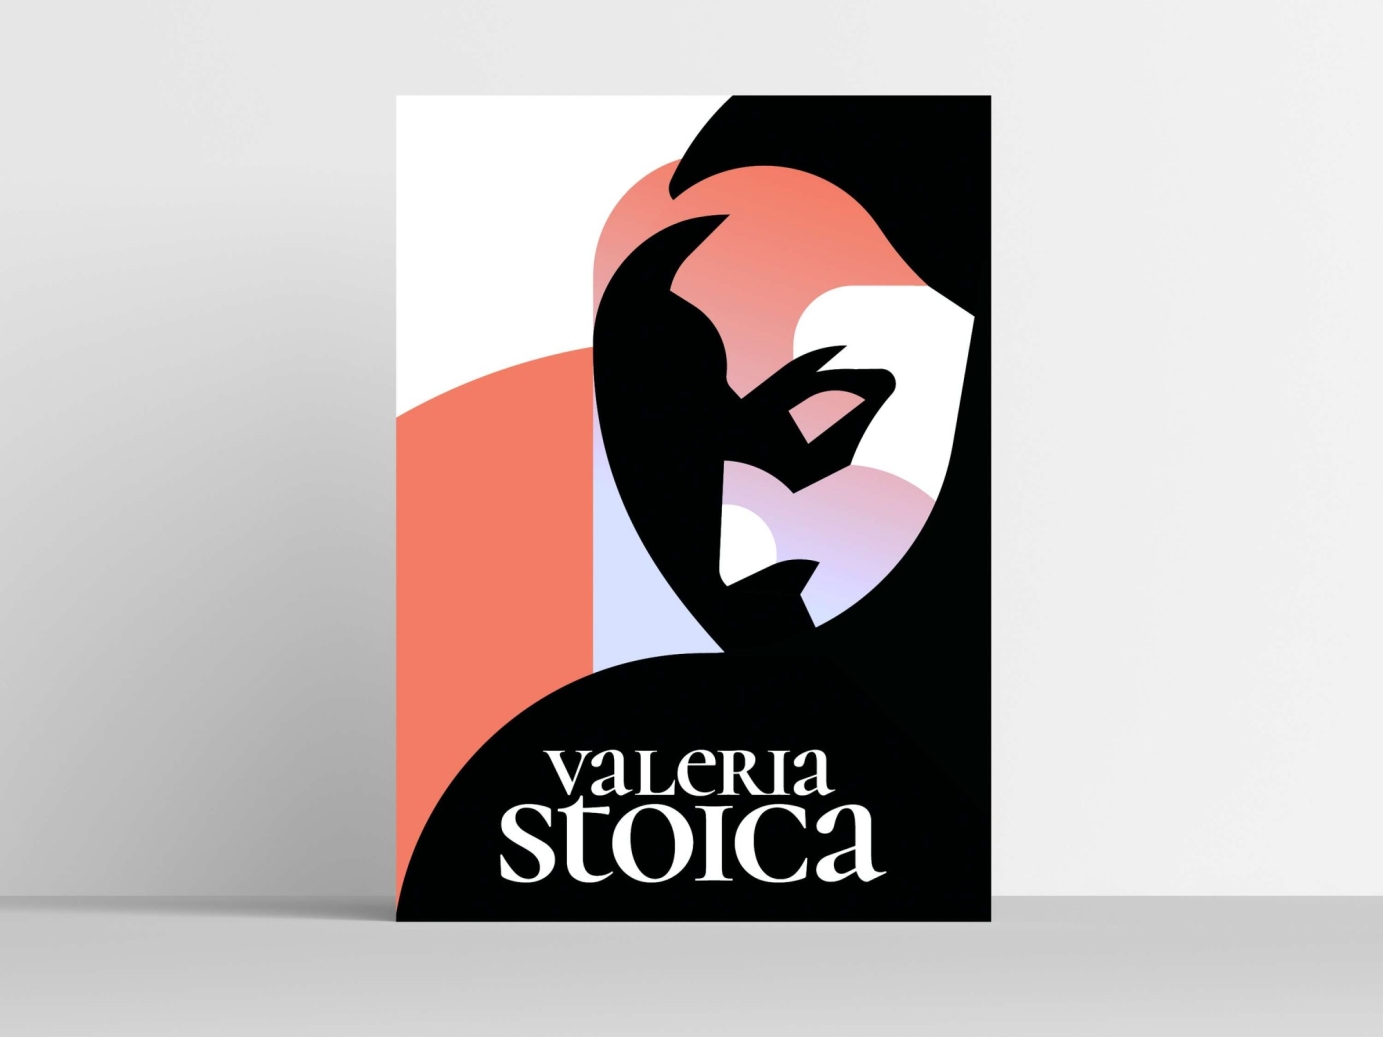 Series of posters for singer Valeria Stoica